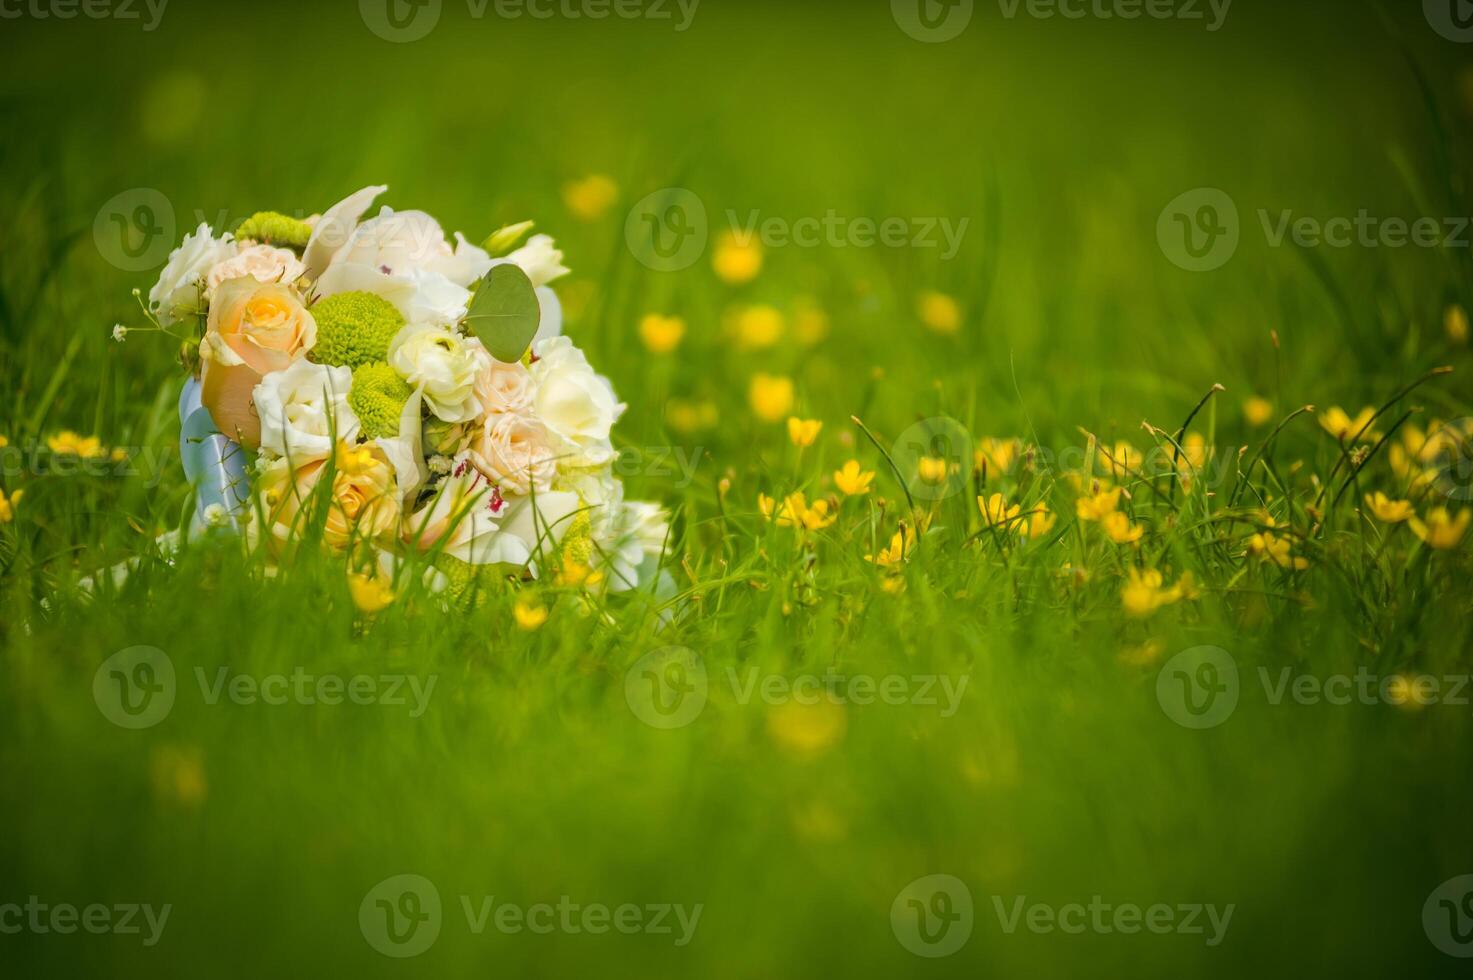 Flower bouquet of creamy roses on grass over the blurred background. Green grass and floral wedding bouquet with beautiful flowers. photo